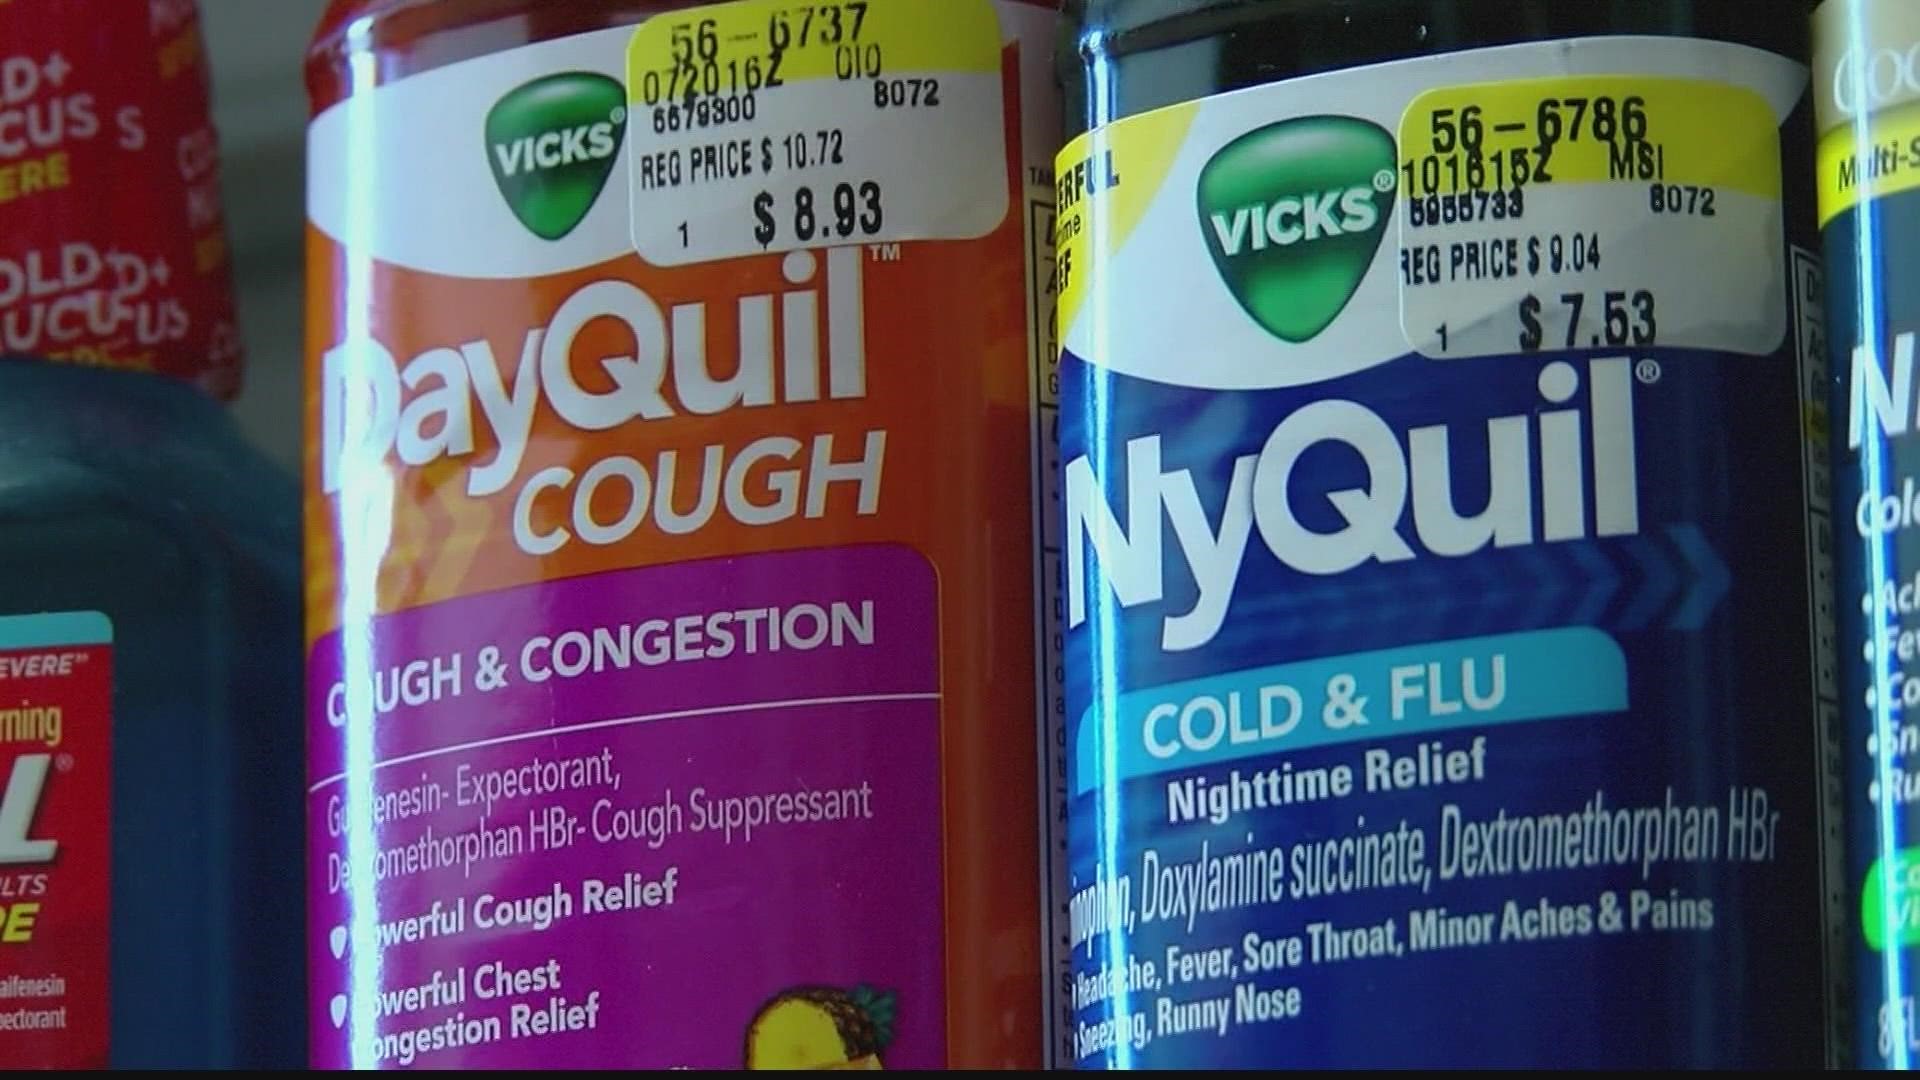 The FDA is warning against a social media challenge dubbed “sleepy chicken” where people cook chicken in NyQuil and other cough and cold medicines.